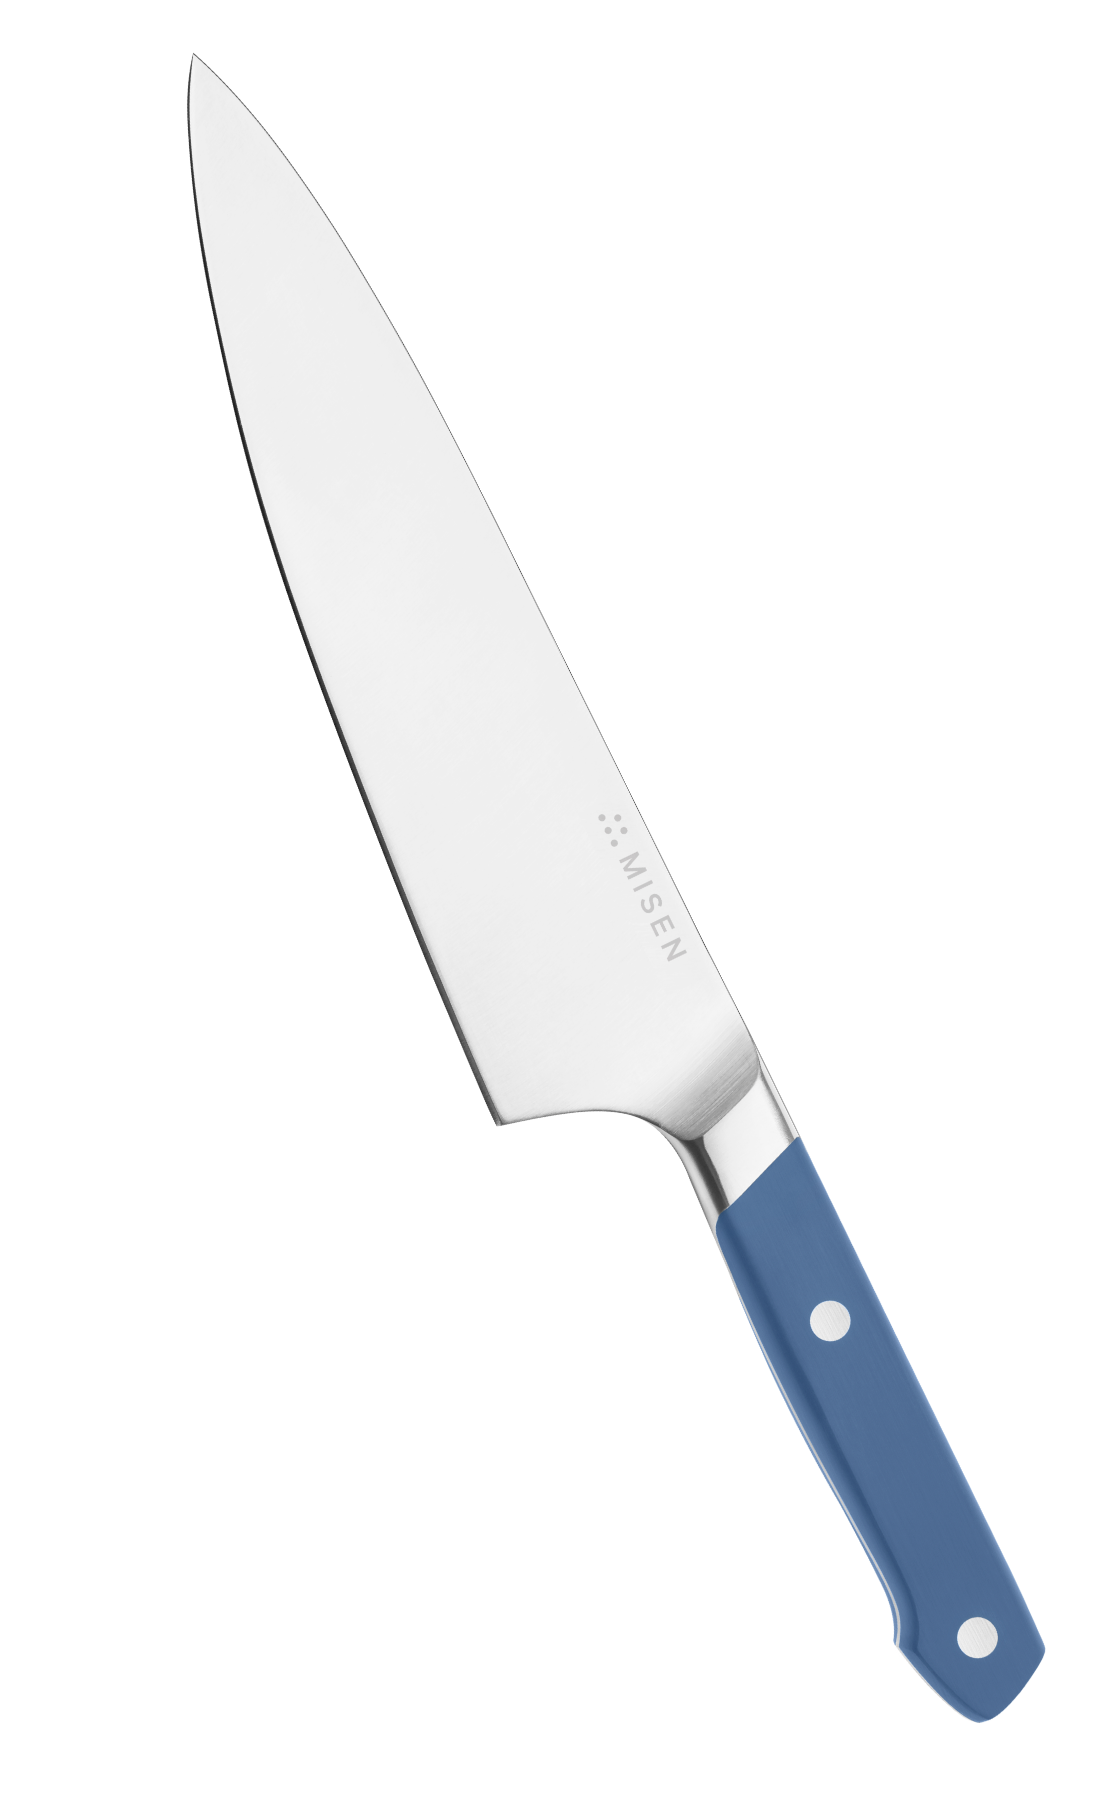 Shop the Misen Chef's Knife now!